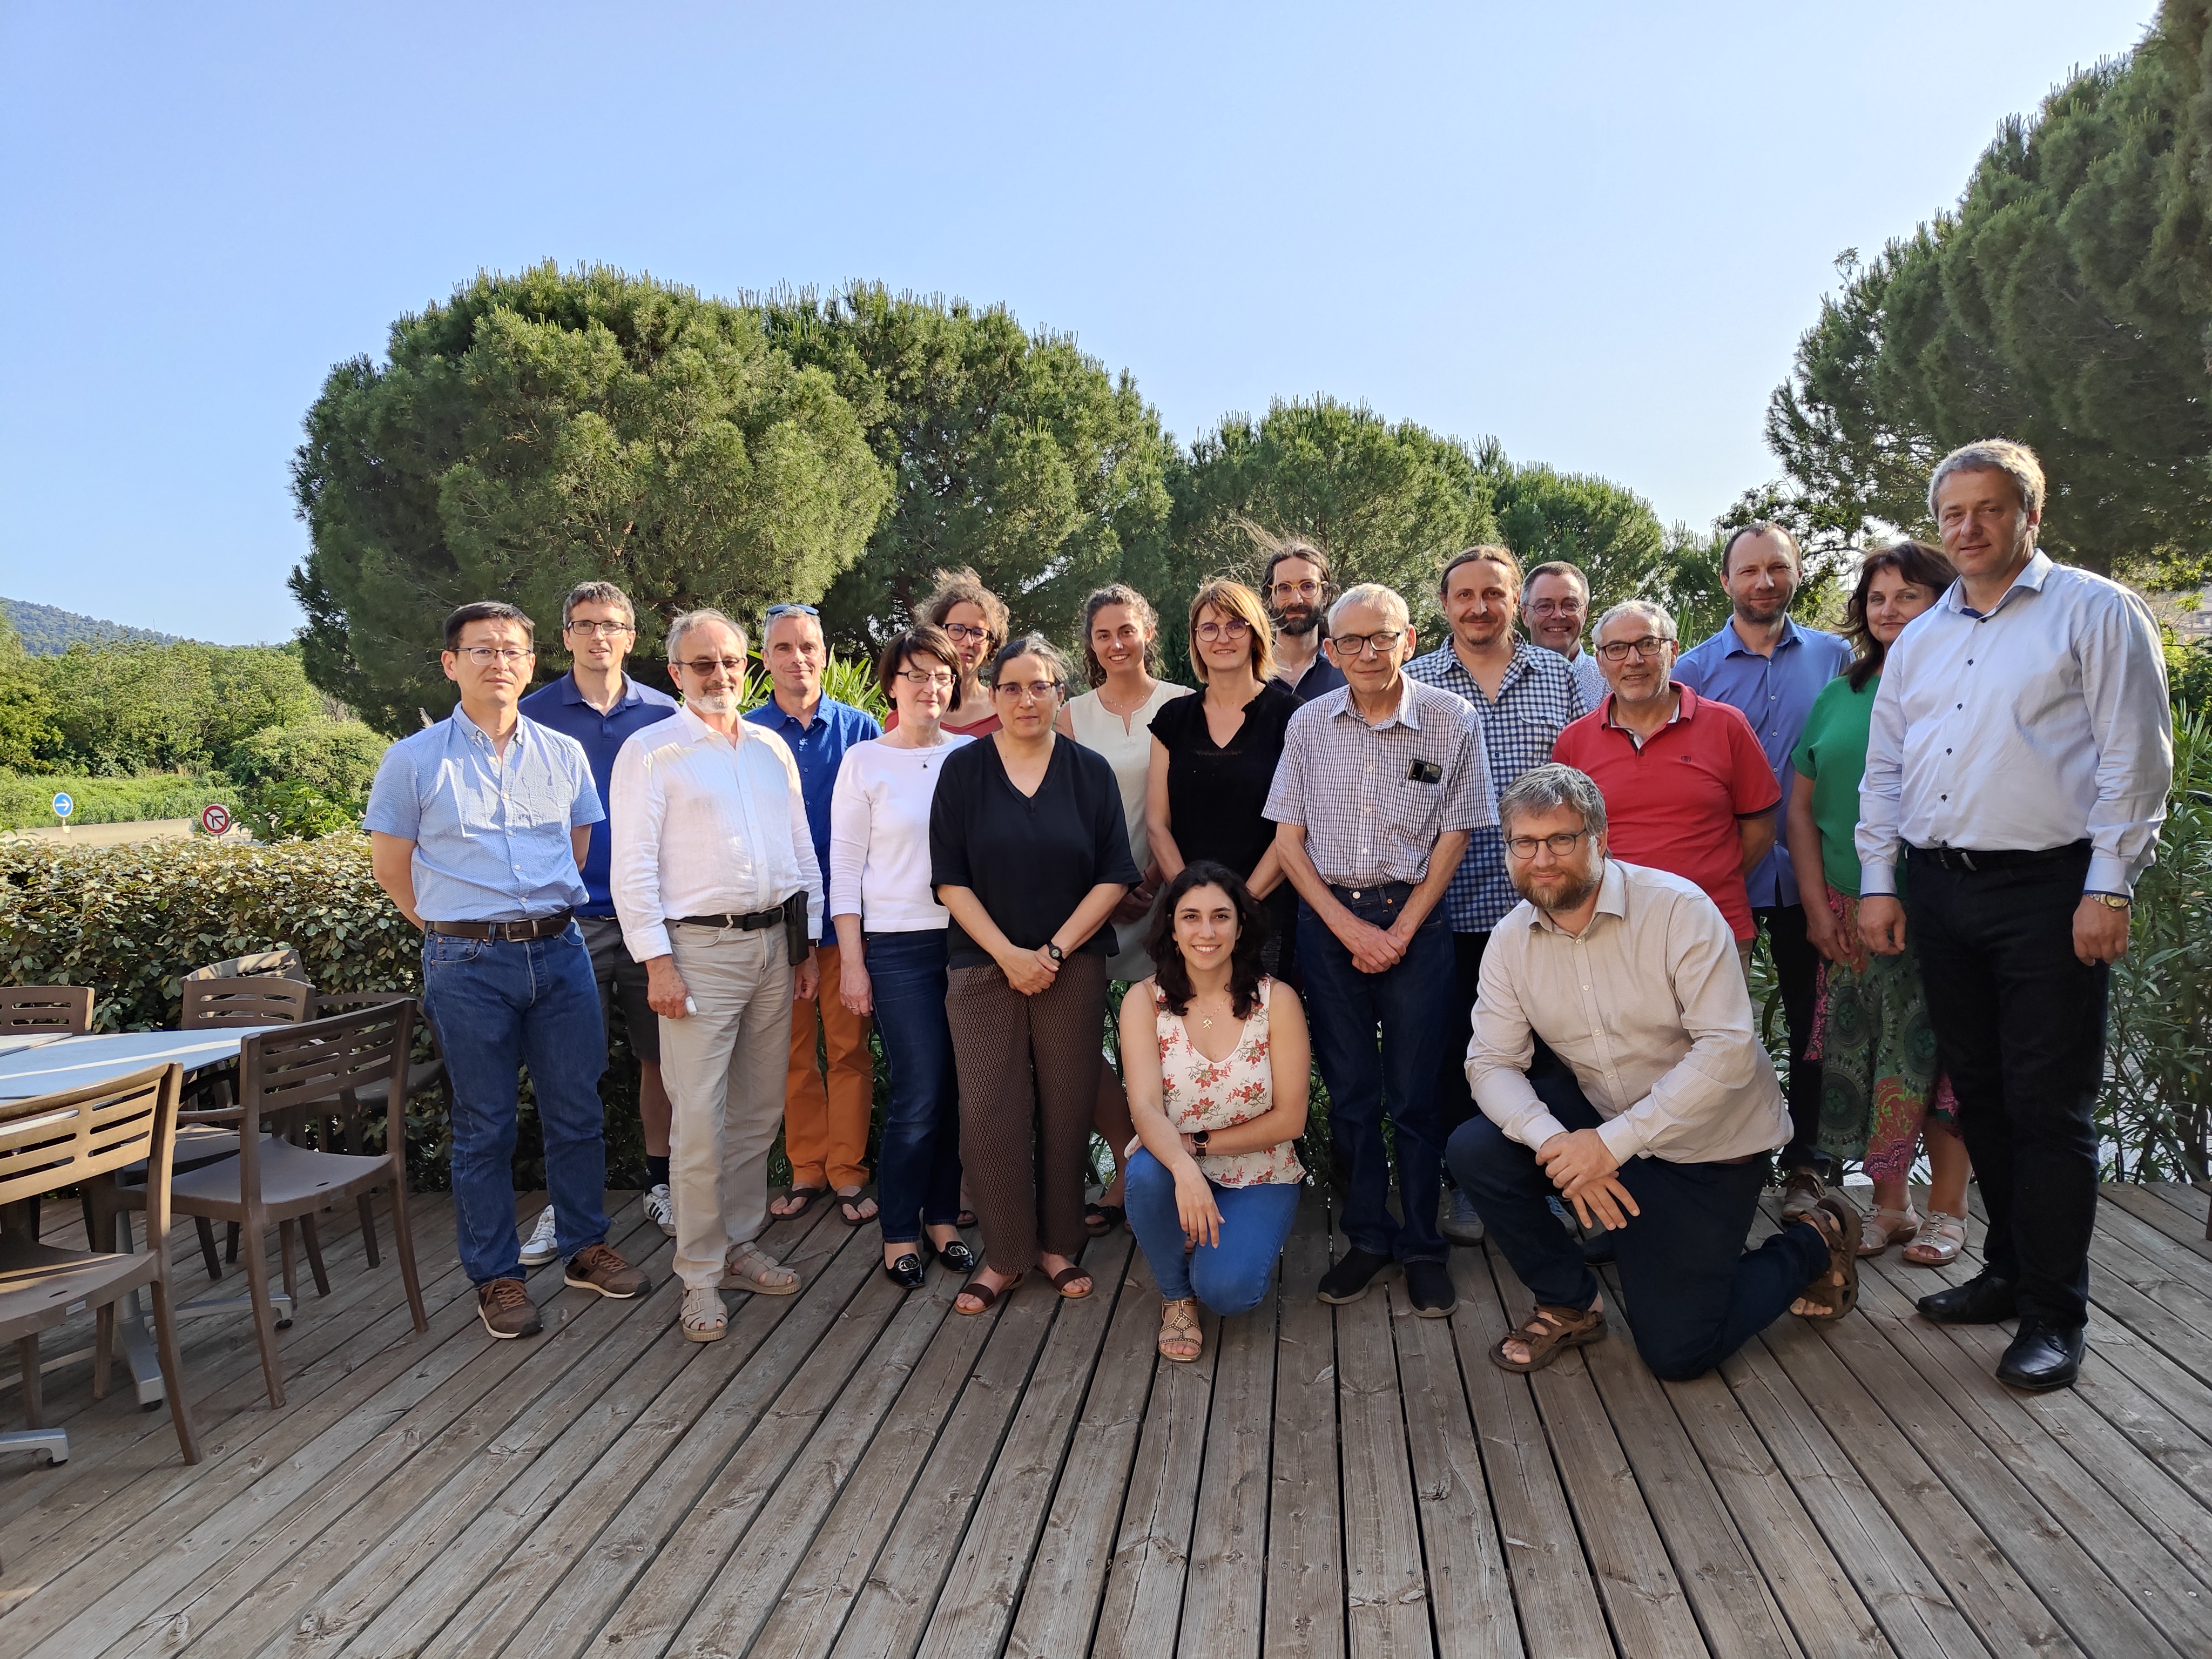 The project partners gathered in Gardanne.